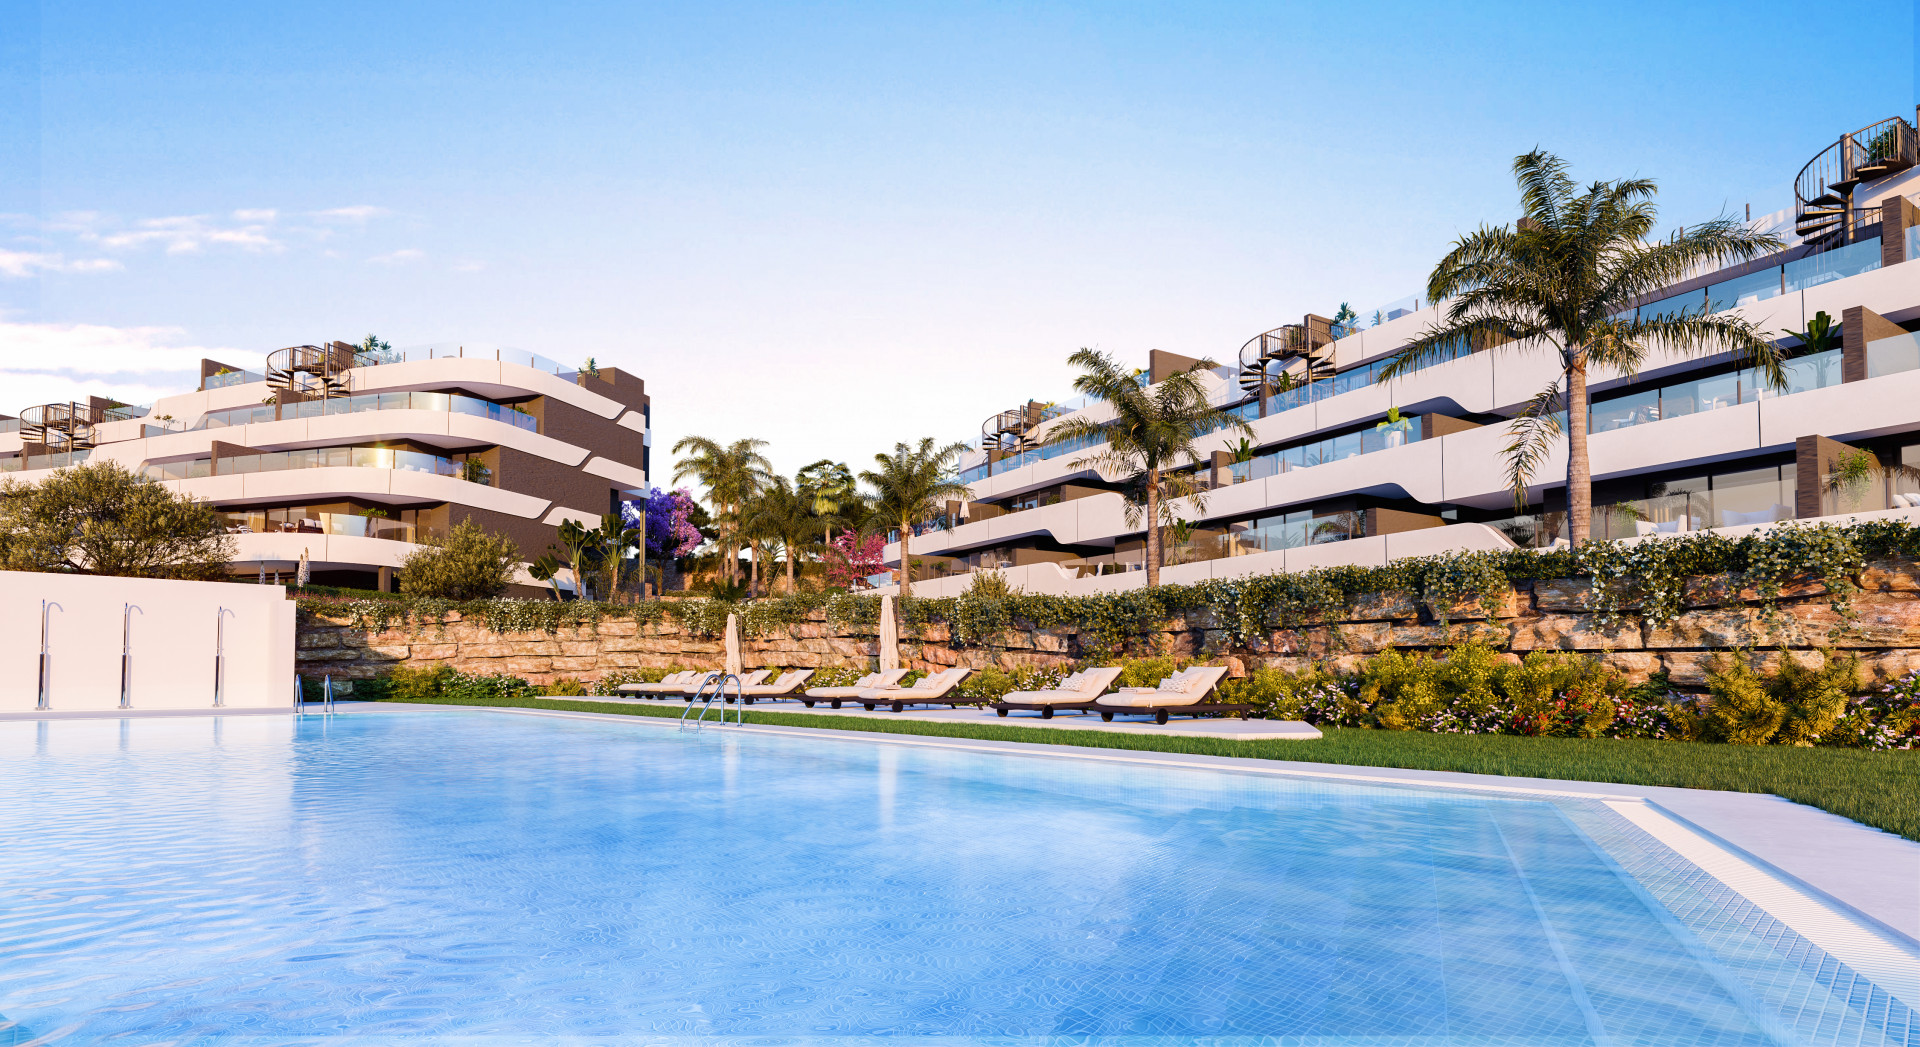 Oasis 325 Phase II: 2 and 3 bedroom apartments in the area of La Resina, Estepona. | Image 2